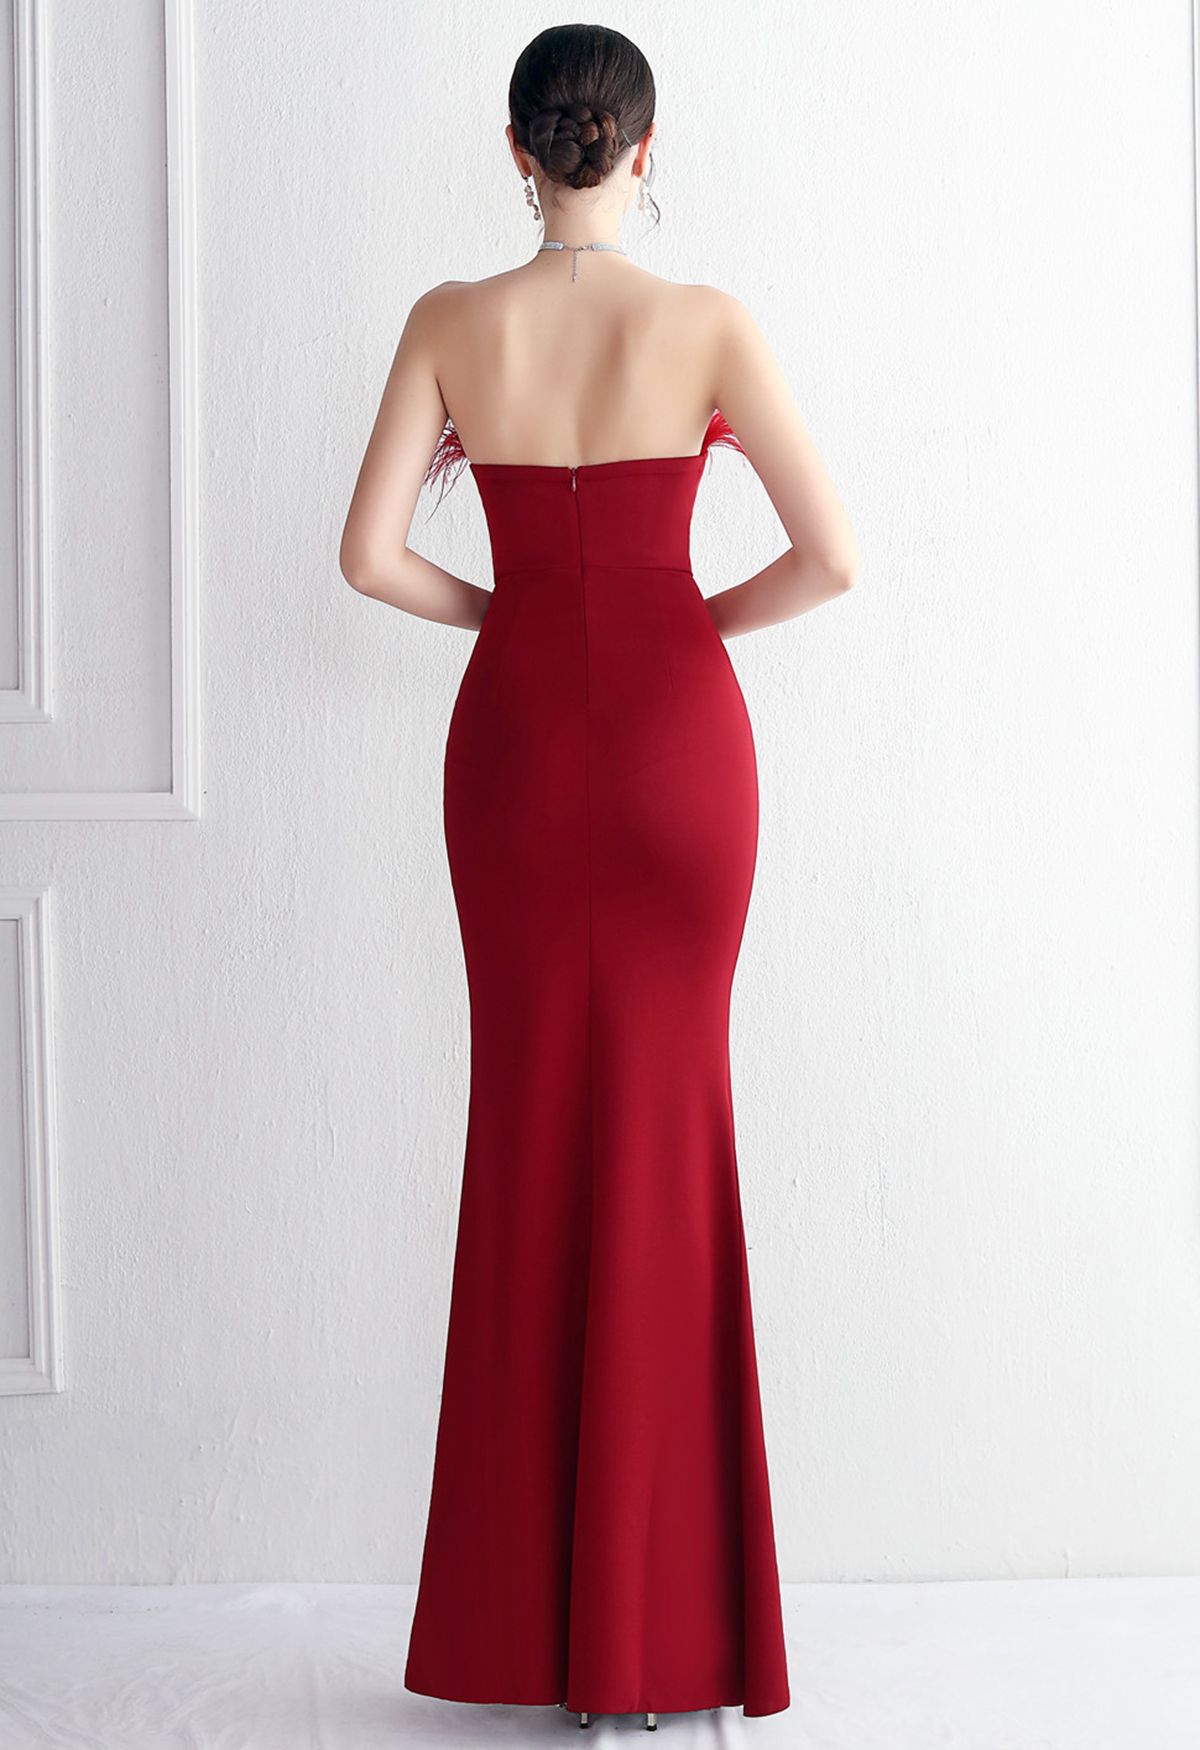 Feather Trim Strapless Slit Gown in Red